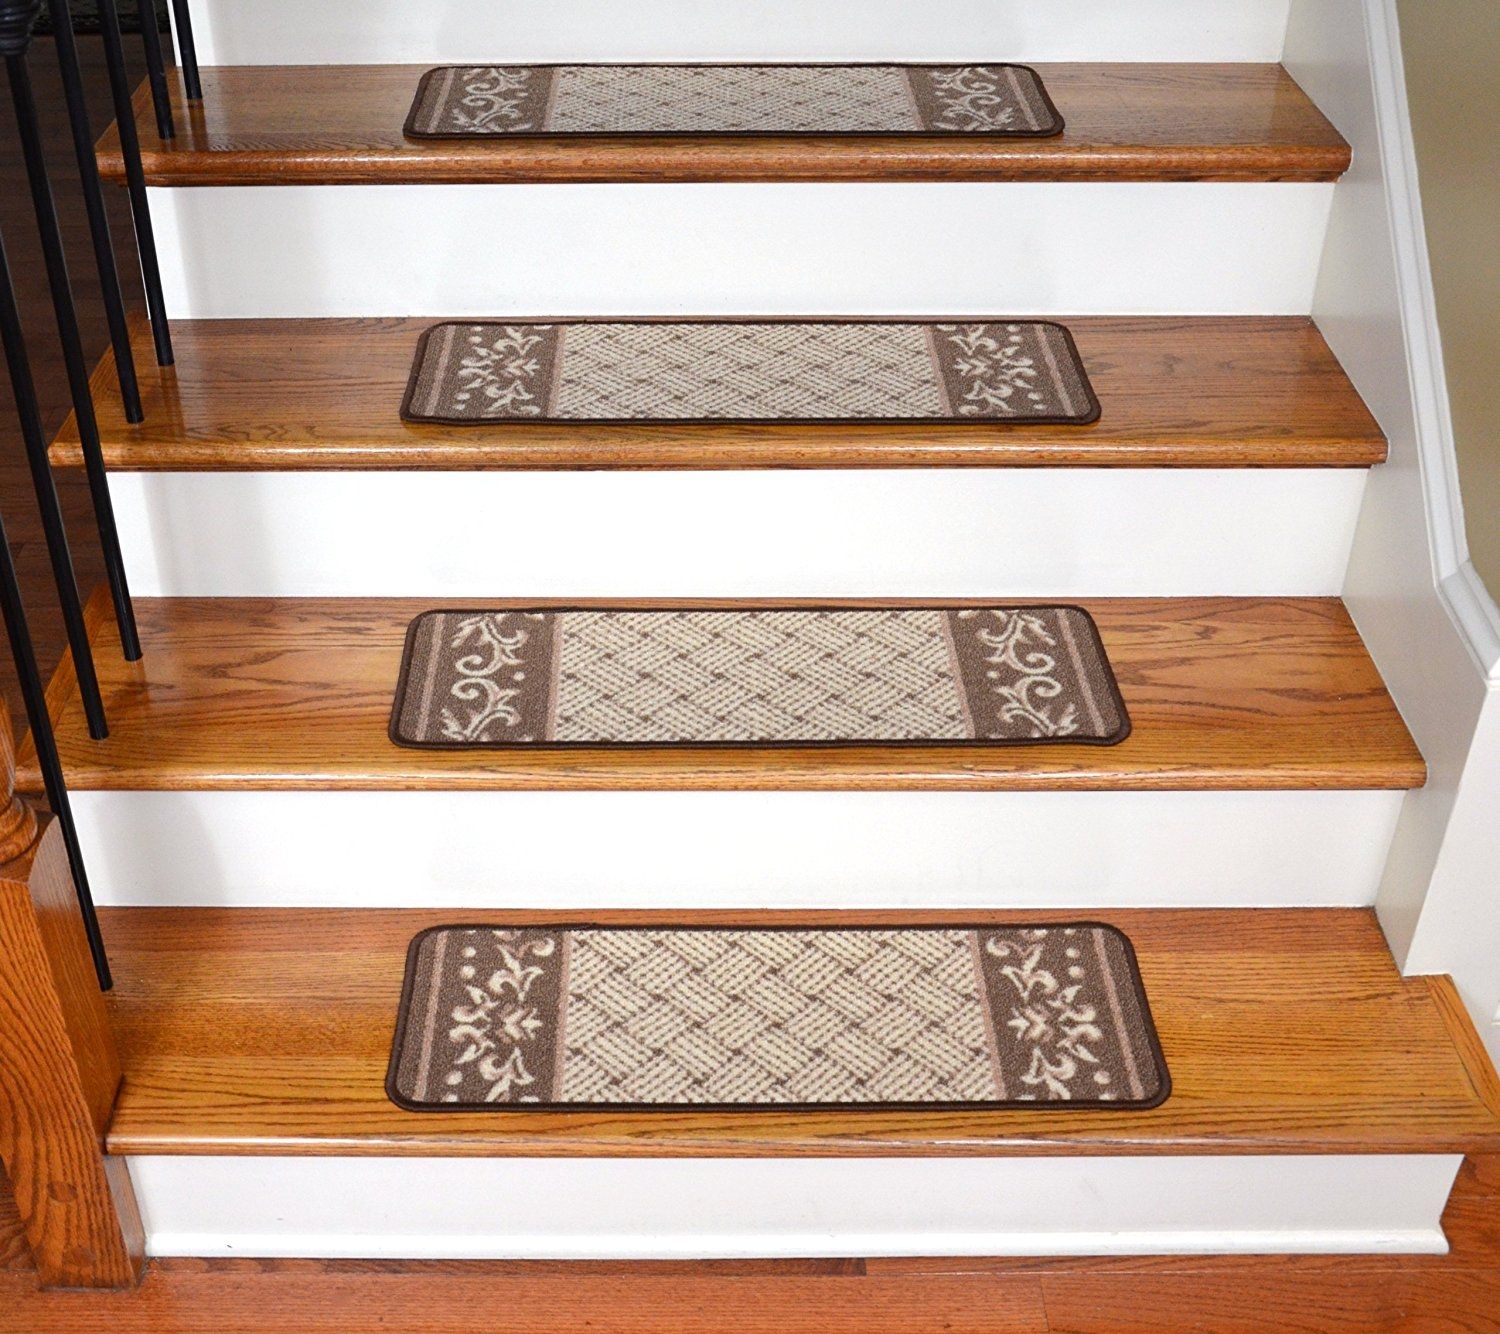 Rug Nice Carpet Stair Treads Lowes For Home Flooring Ideas Throughout Bullnose Stair Tread Rugs (View 7 of 20)